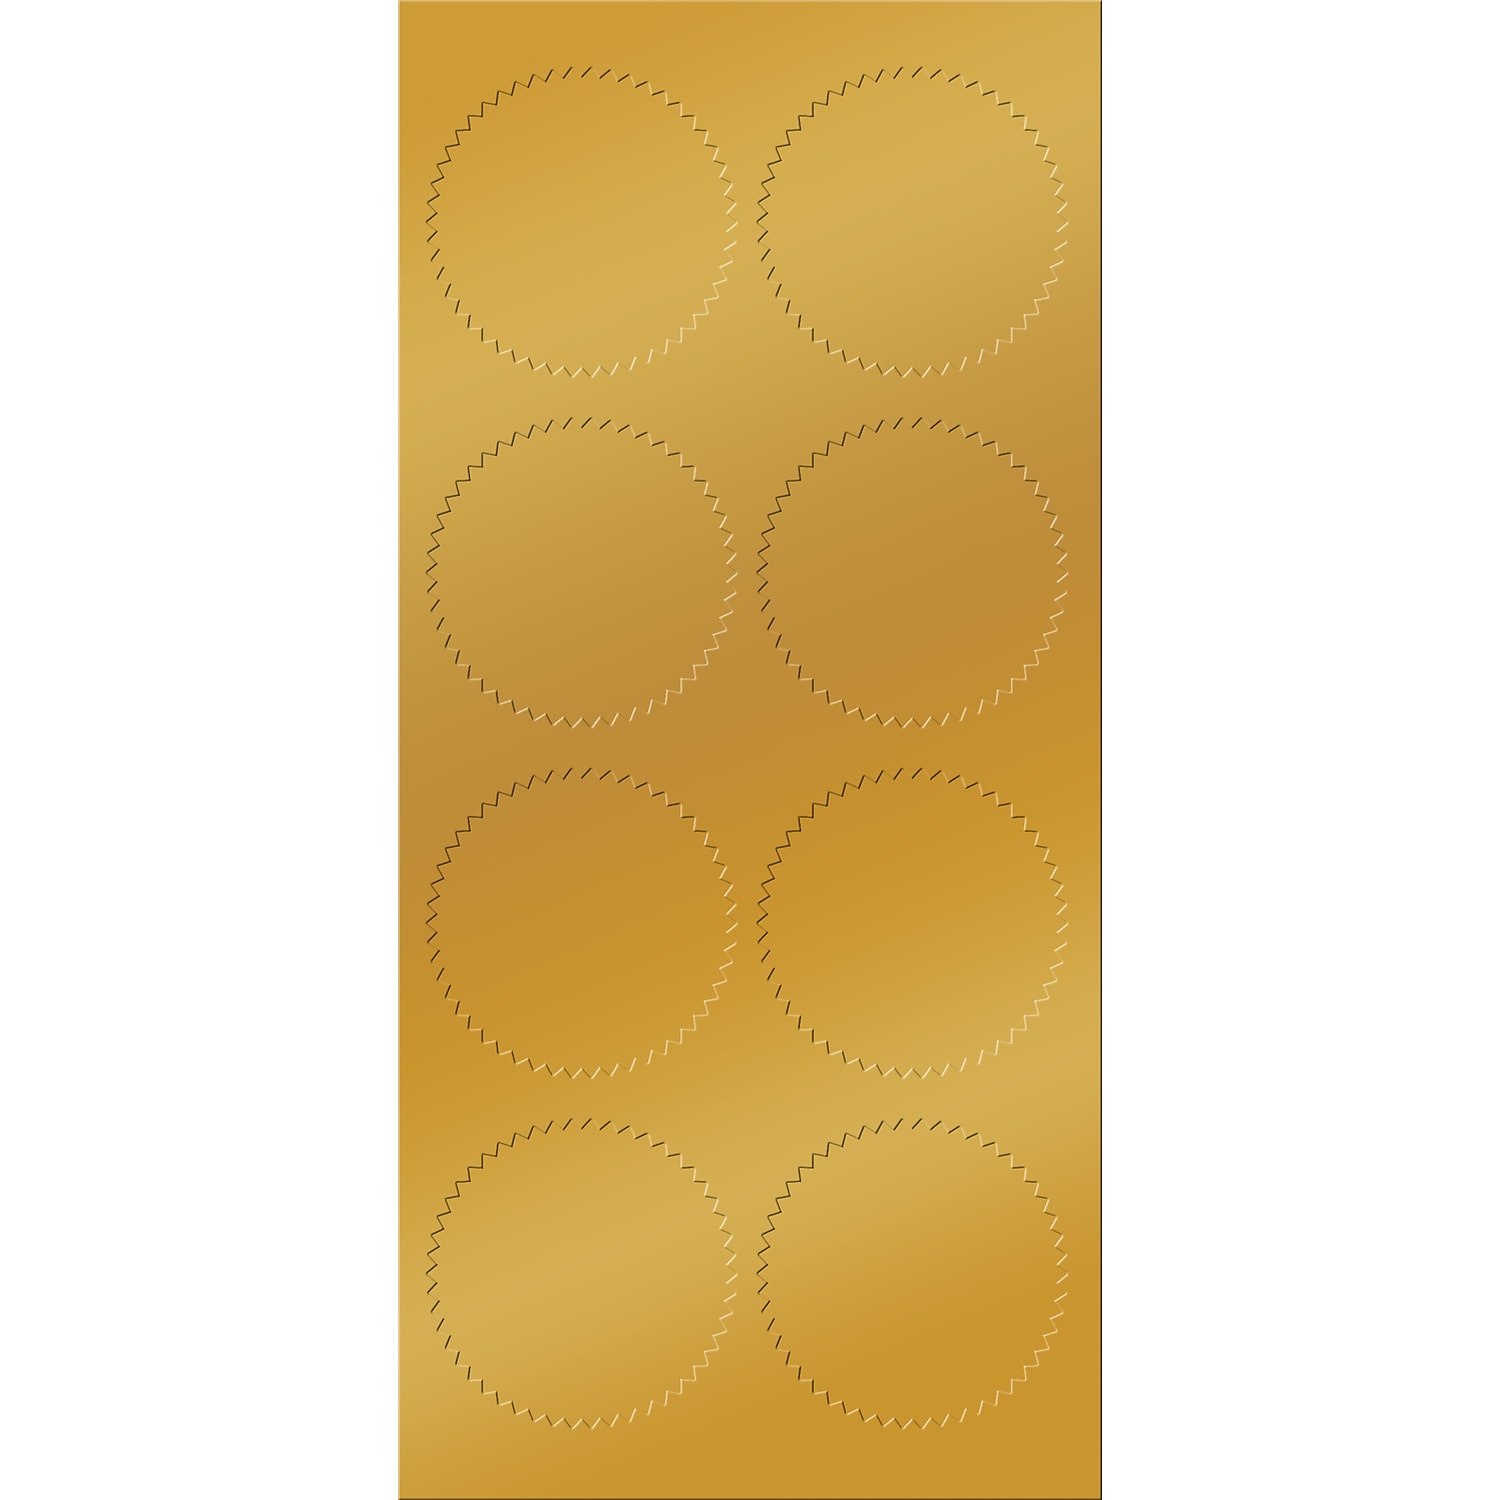 Great Papers! Seals Gold Foil 50/Pack (901200) - image 2 of 4